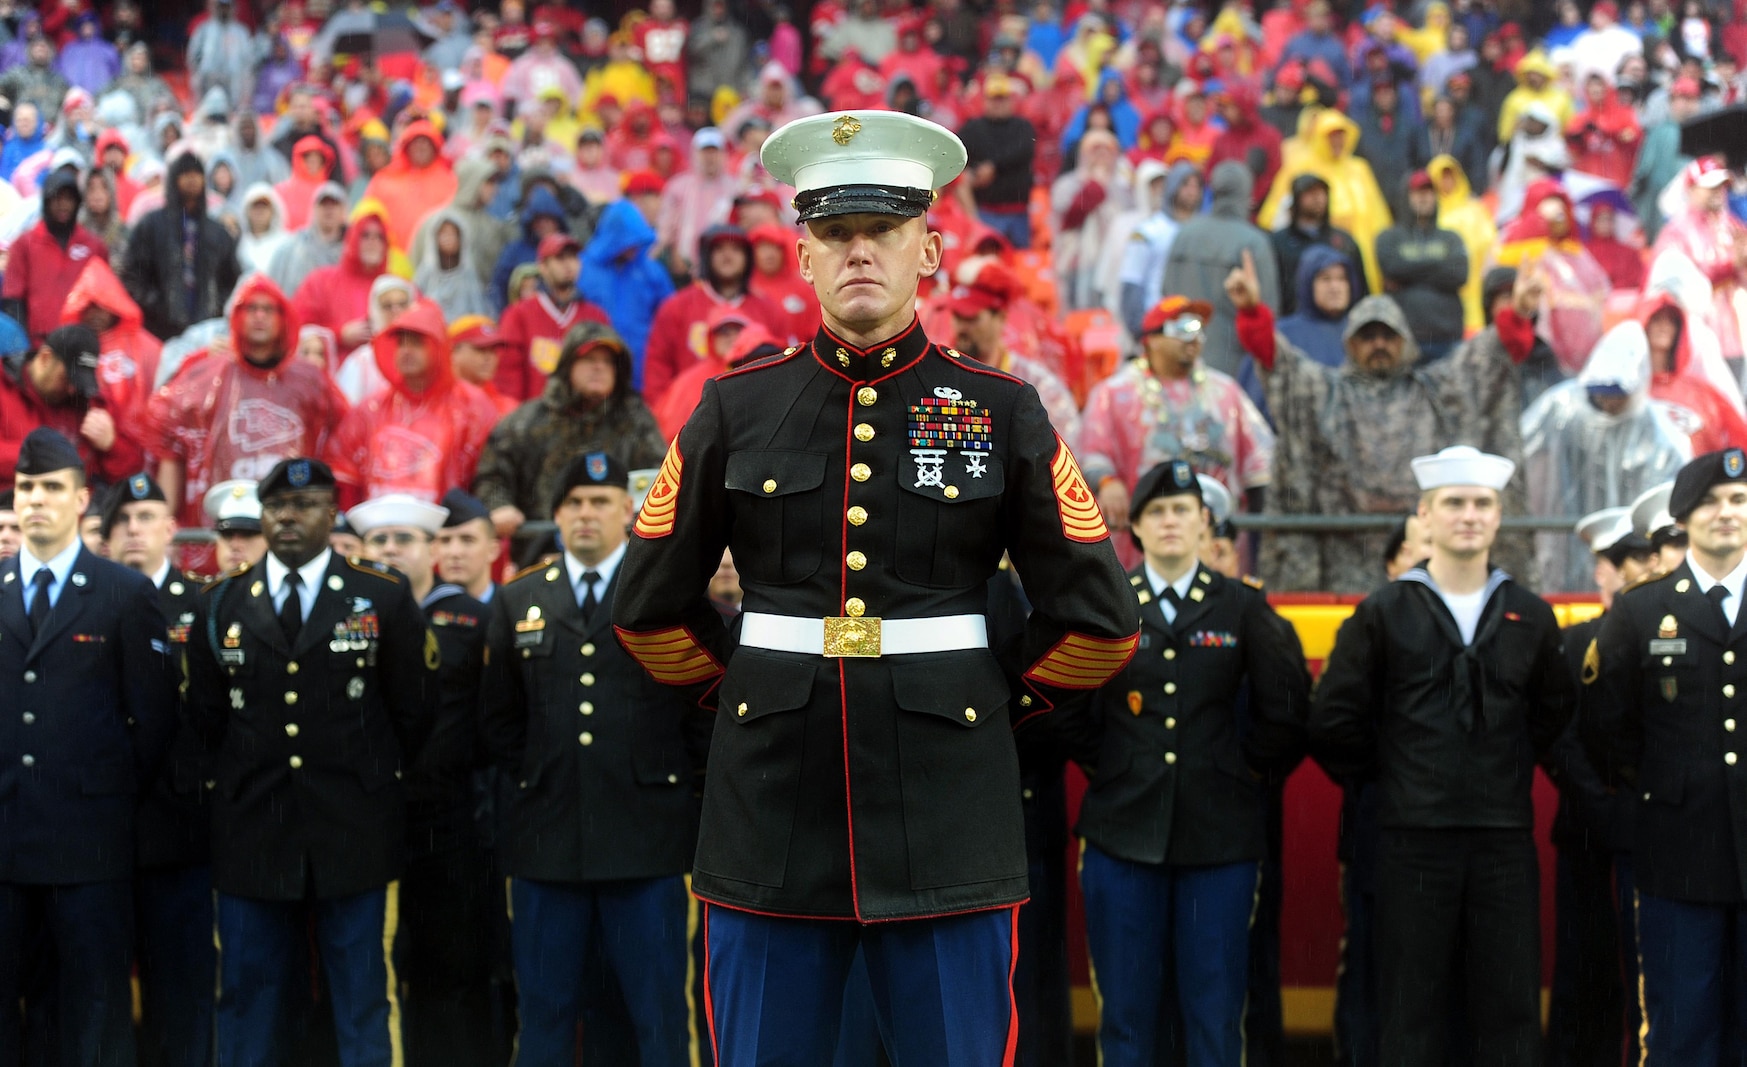 Sergeant Major Christopher A. Farrell, Marine Corps Recruiting Station Kansas City sergeant major, stands before a joint-service formation before the start of the Kansas City Chiefs' Military Appreciation Day game against the San Diego Chargers at Arrowhead Stadium, Dec. 13, 2015. Servicemembers from the Marine Corps, Army, Navy, Air Force, and Coast Guard were in attendance for the day's pregame and halftime festivities which included military vehicle static displays, joint-service color guard, and the Marine Corps Silent Drill Platoon.